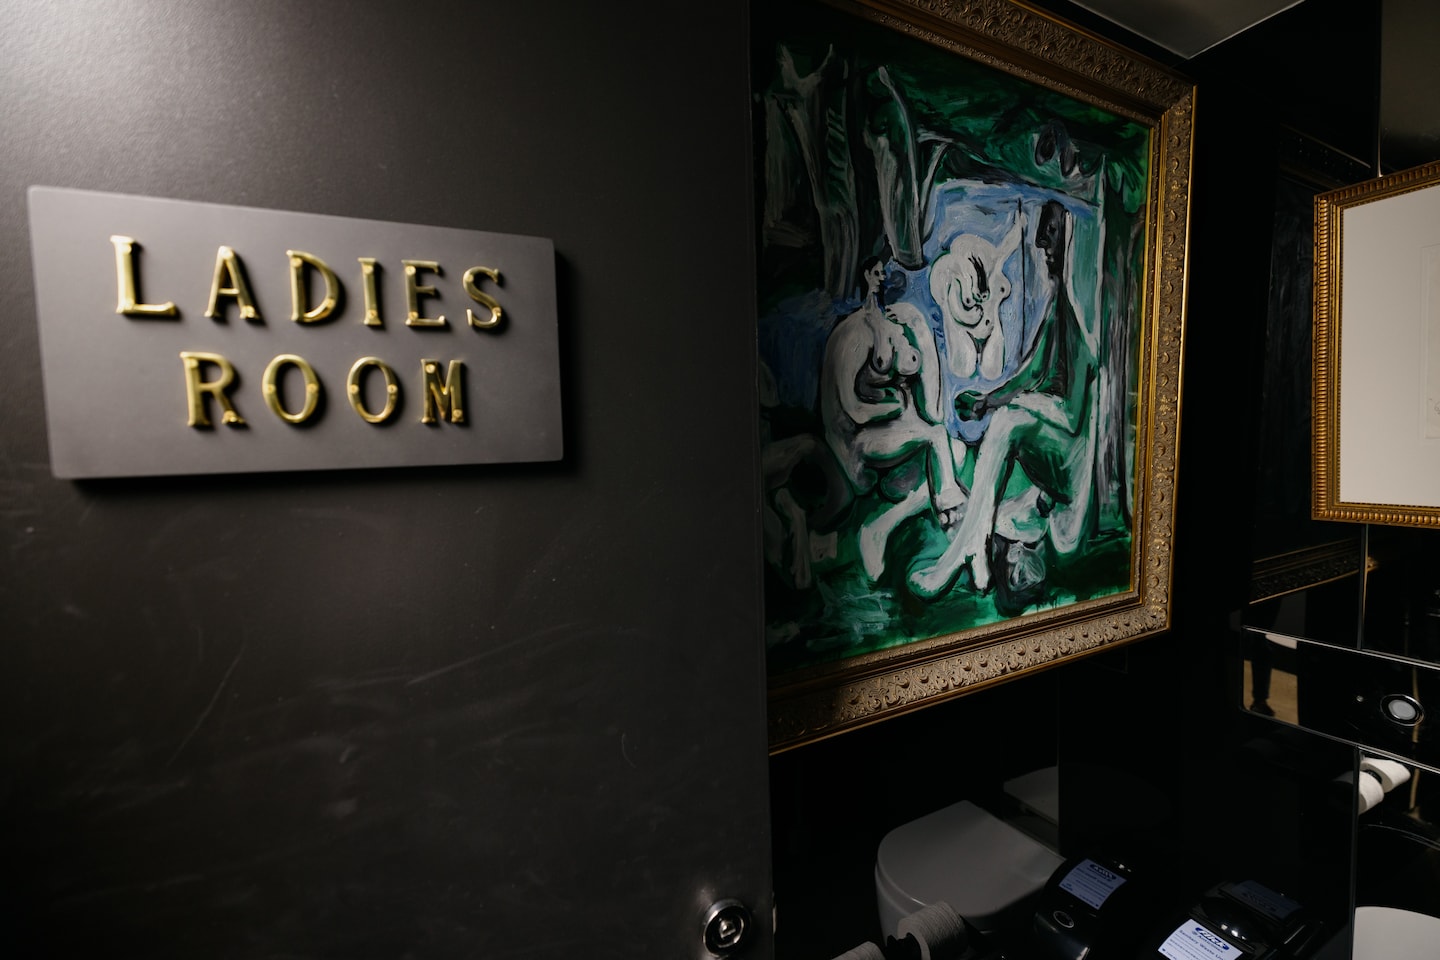 This art museum has a new home for its Picassos: The women’s bathroom